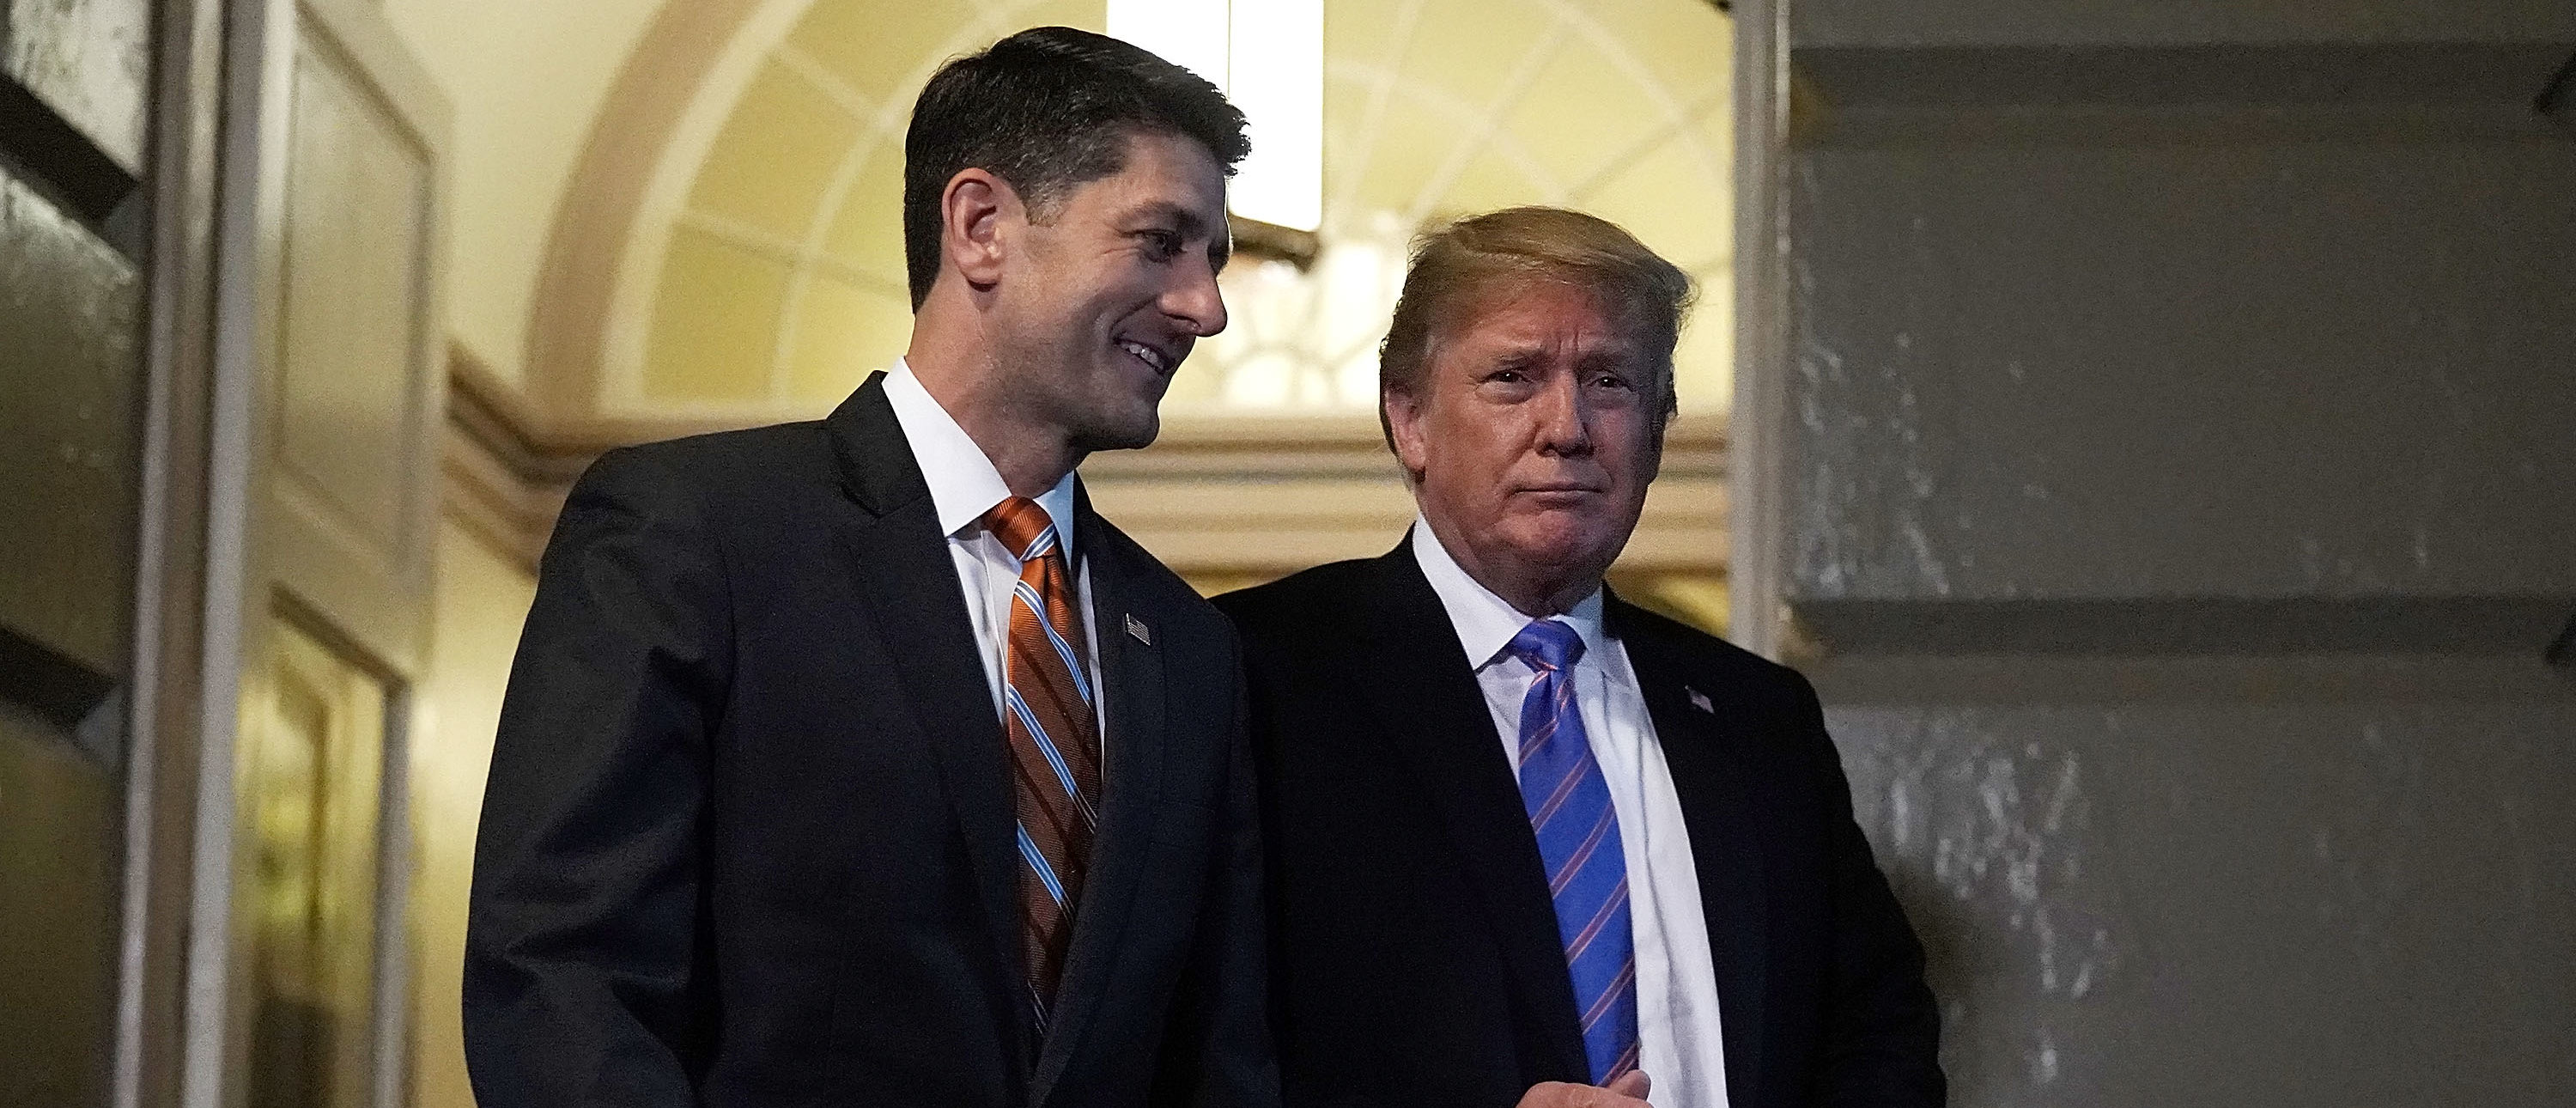 WASHINGTON, DC - JUNE 19: Accompanied by Speaker of the House Rep. Paul Ryan (R-WI) (L), U.S. President Donald Trump (R) arrives at a meeting with House Republicans at the U.S. Capitol June 19, 2018 in Washington, DC. Trump was on the Hill to discuss immigration with House Republicans. (Photo by Alex Wong/Getty Images)